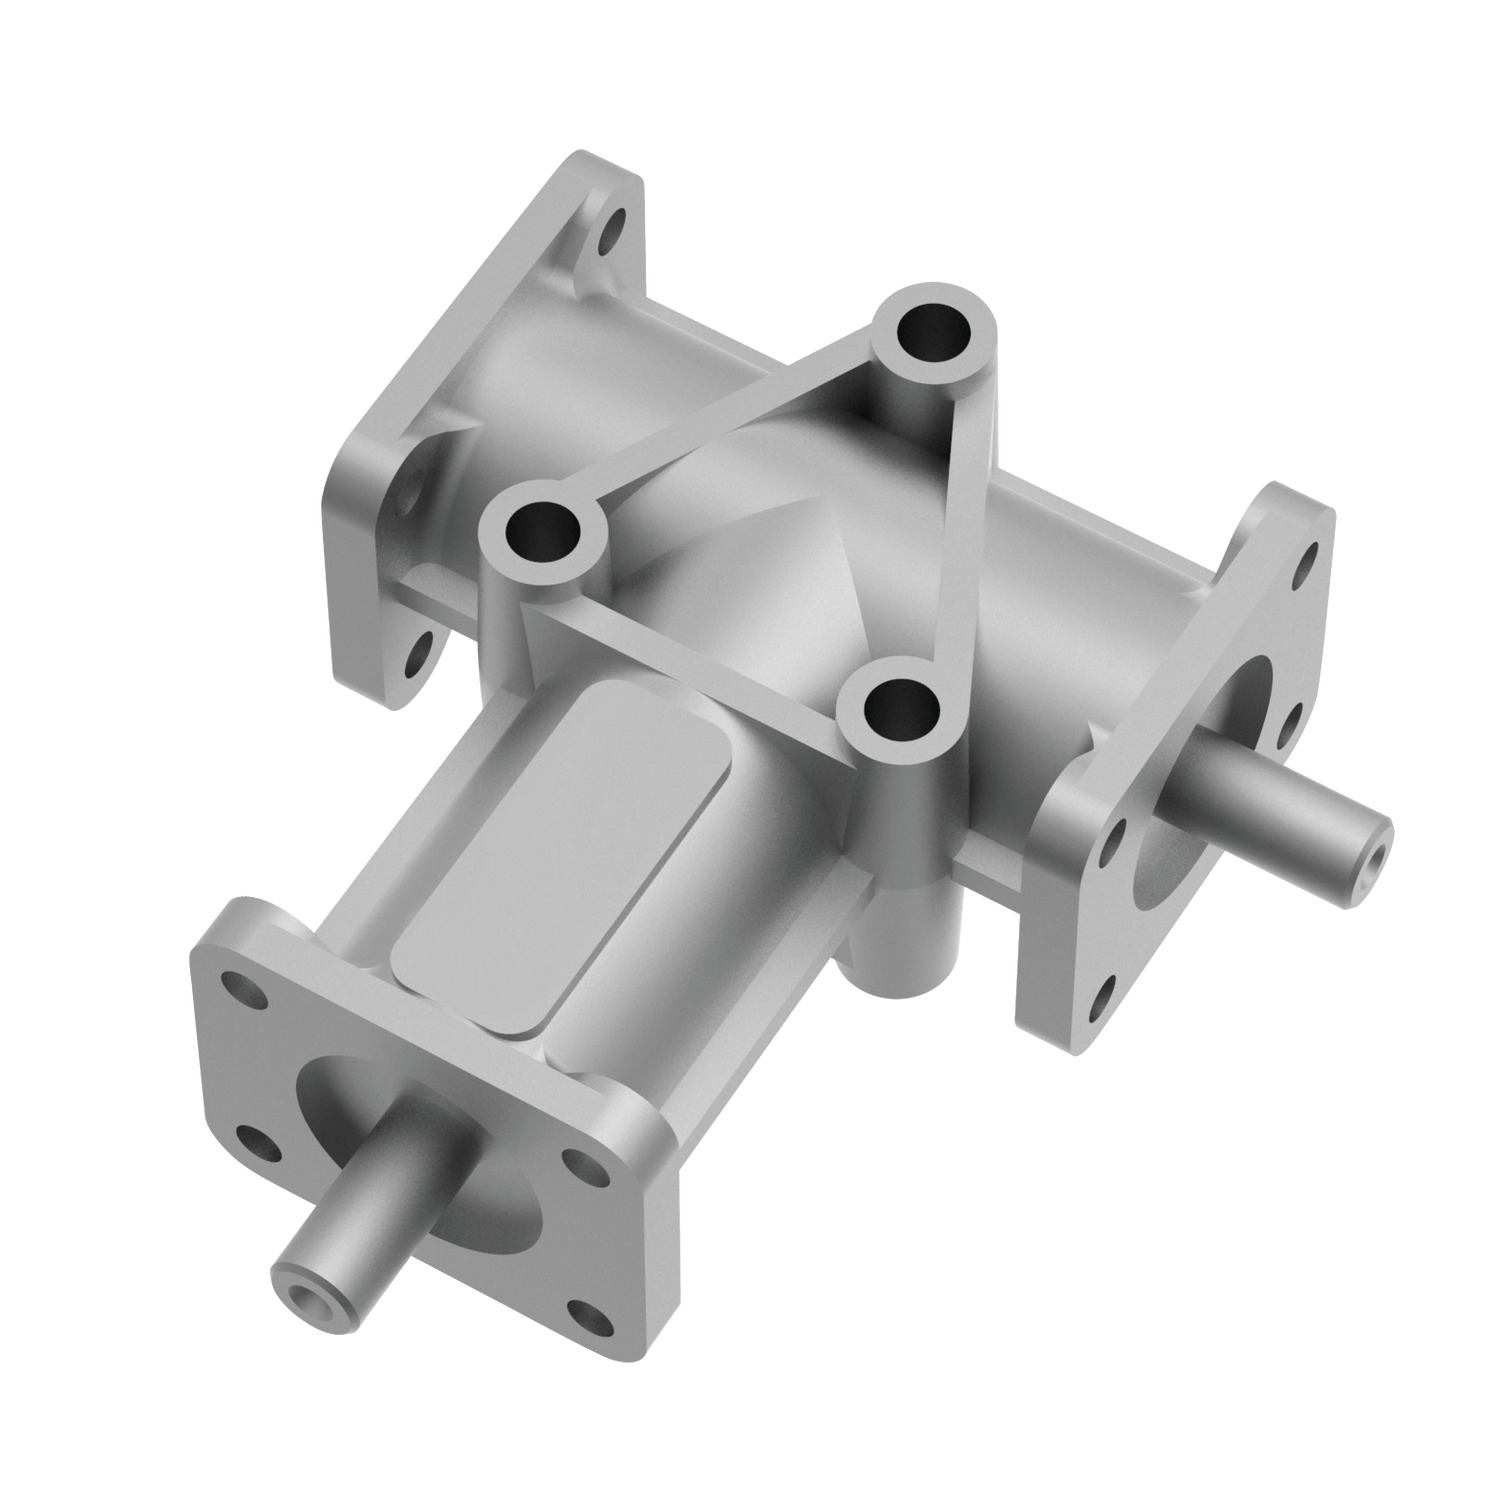 Two Shaft Gear Boxes Two shaft right angle gear boxes in sizes up to Ø24 shafts. Made from lightweight aluminium alloy housing with hollow shaft versions also available.